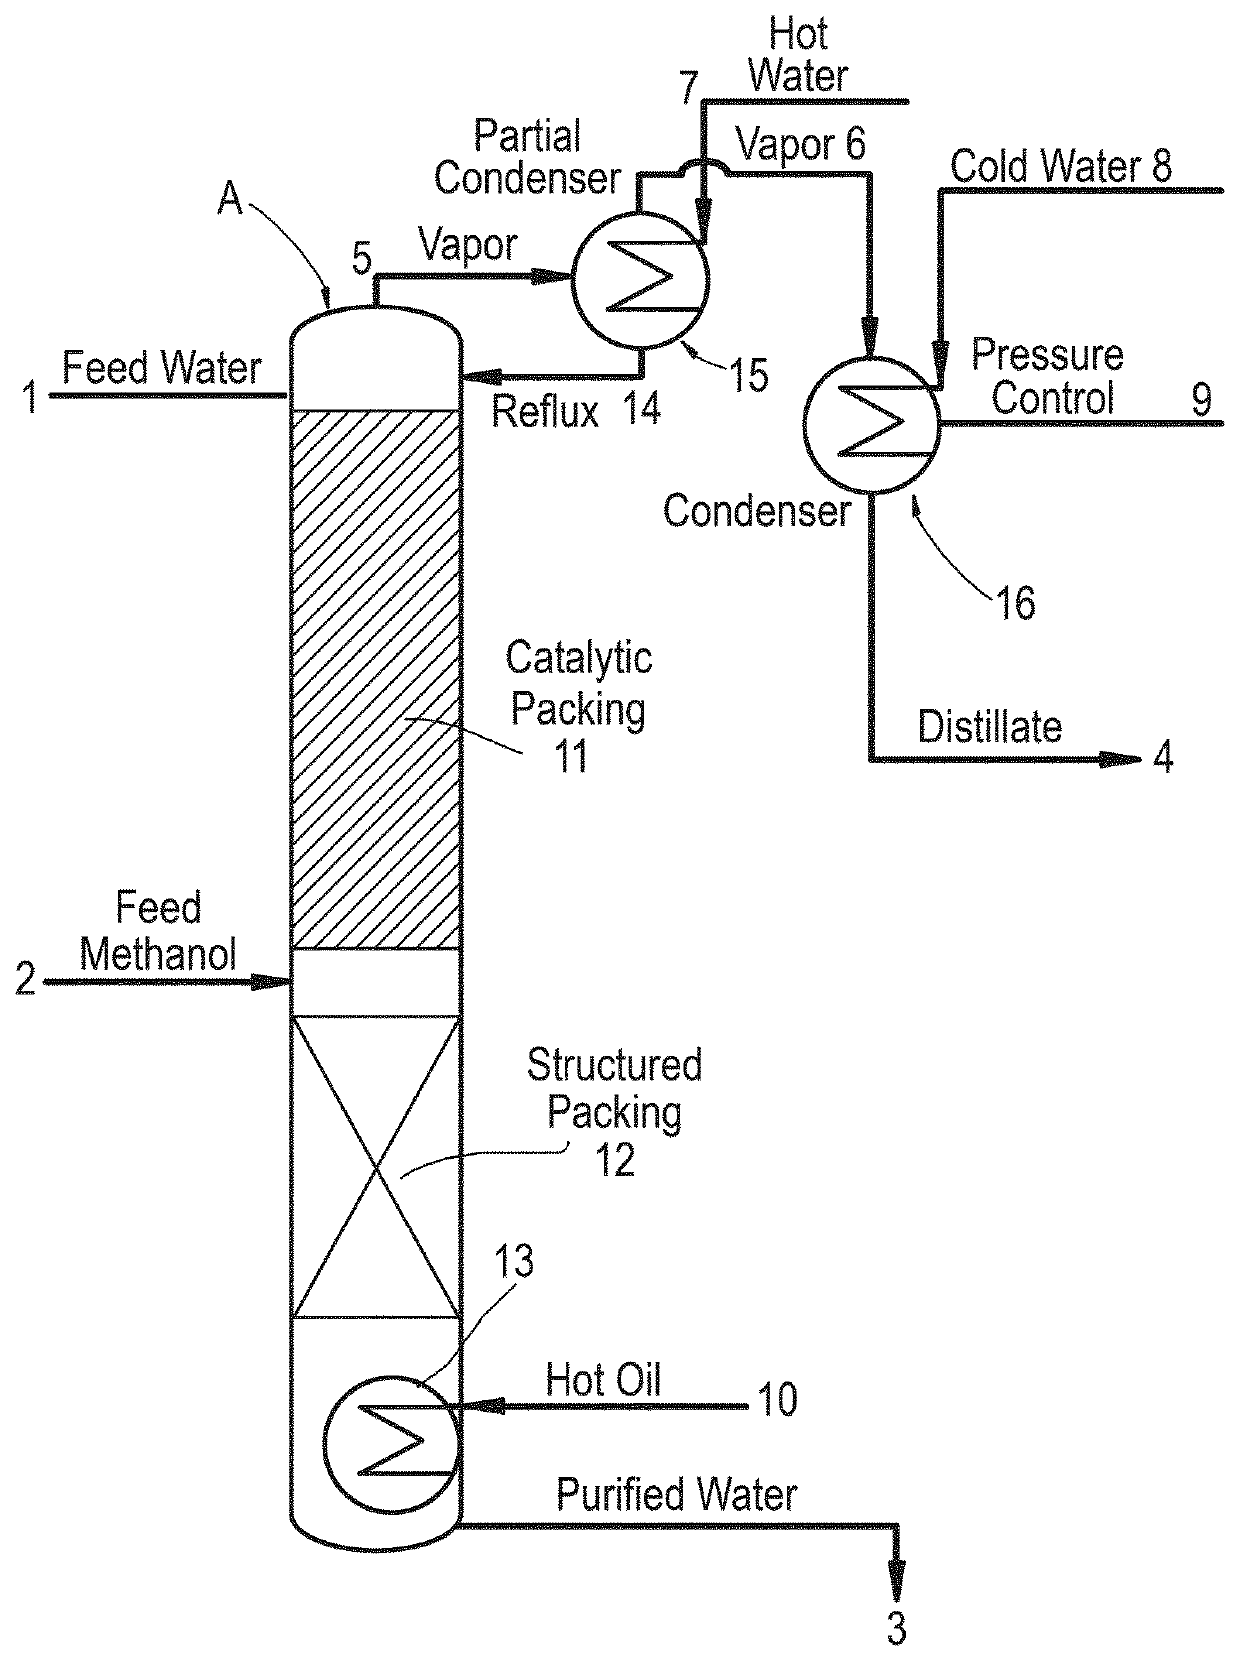 Apparatus and method for reactive distillation for waste water treatment